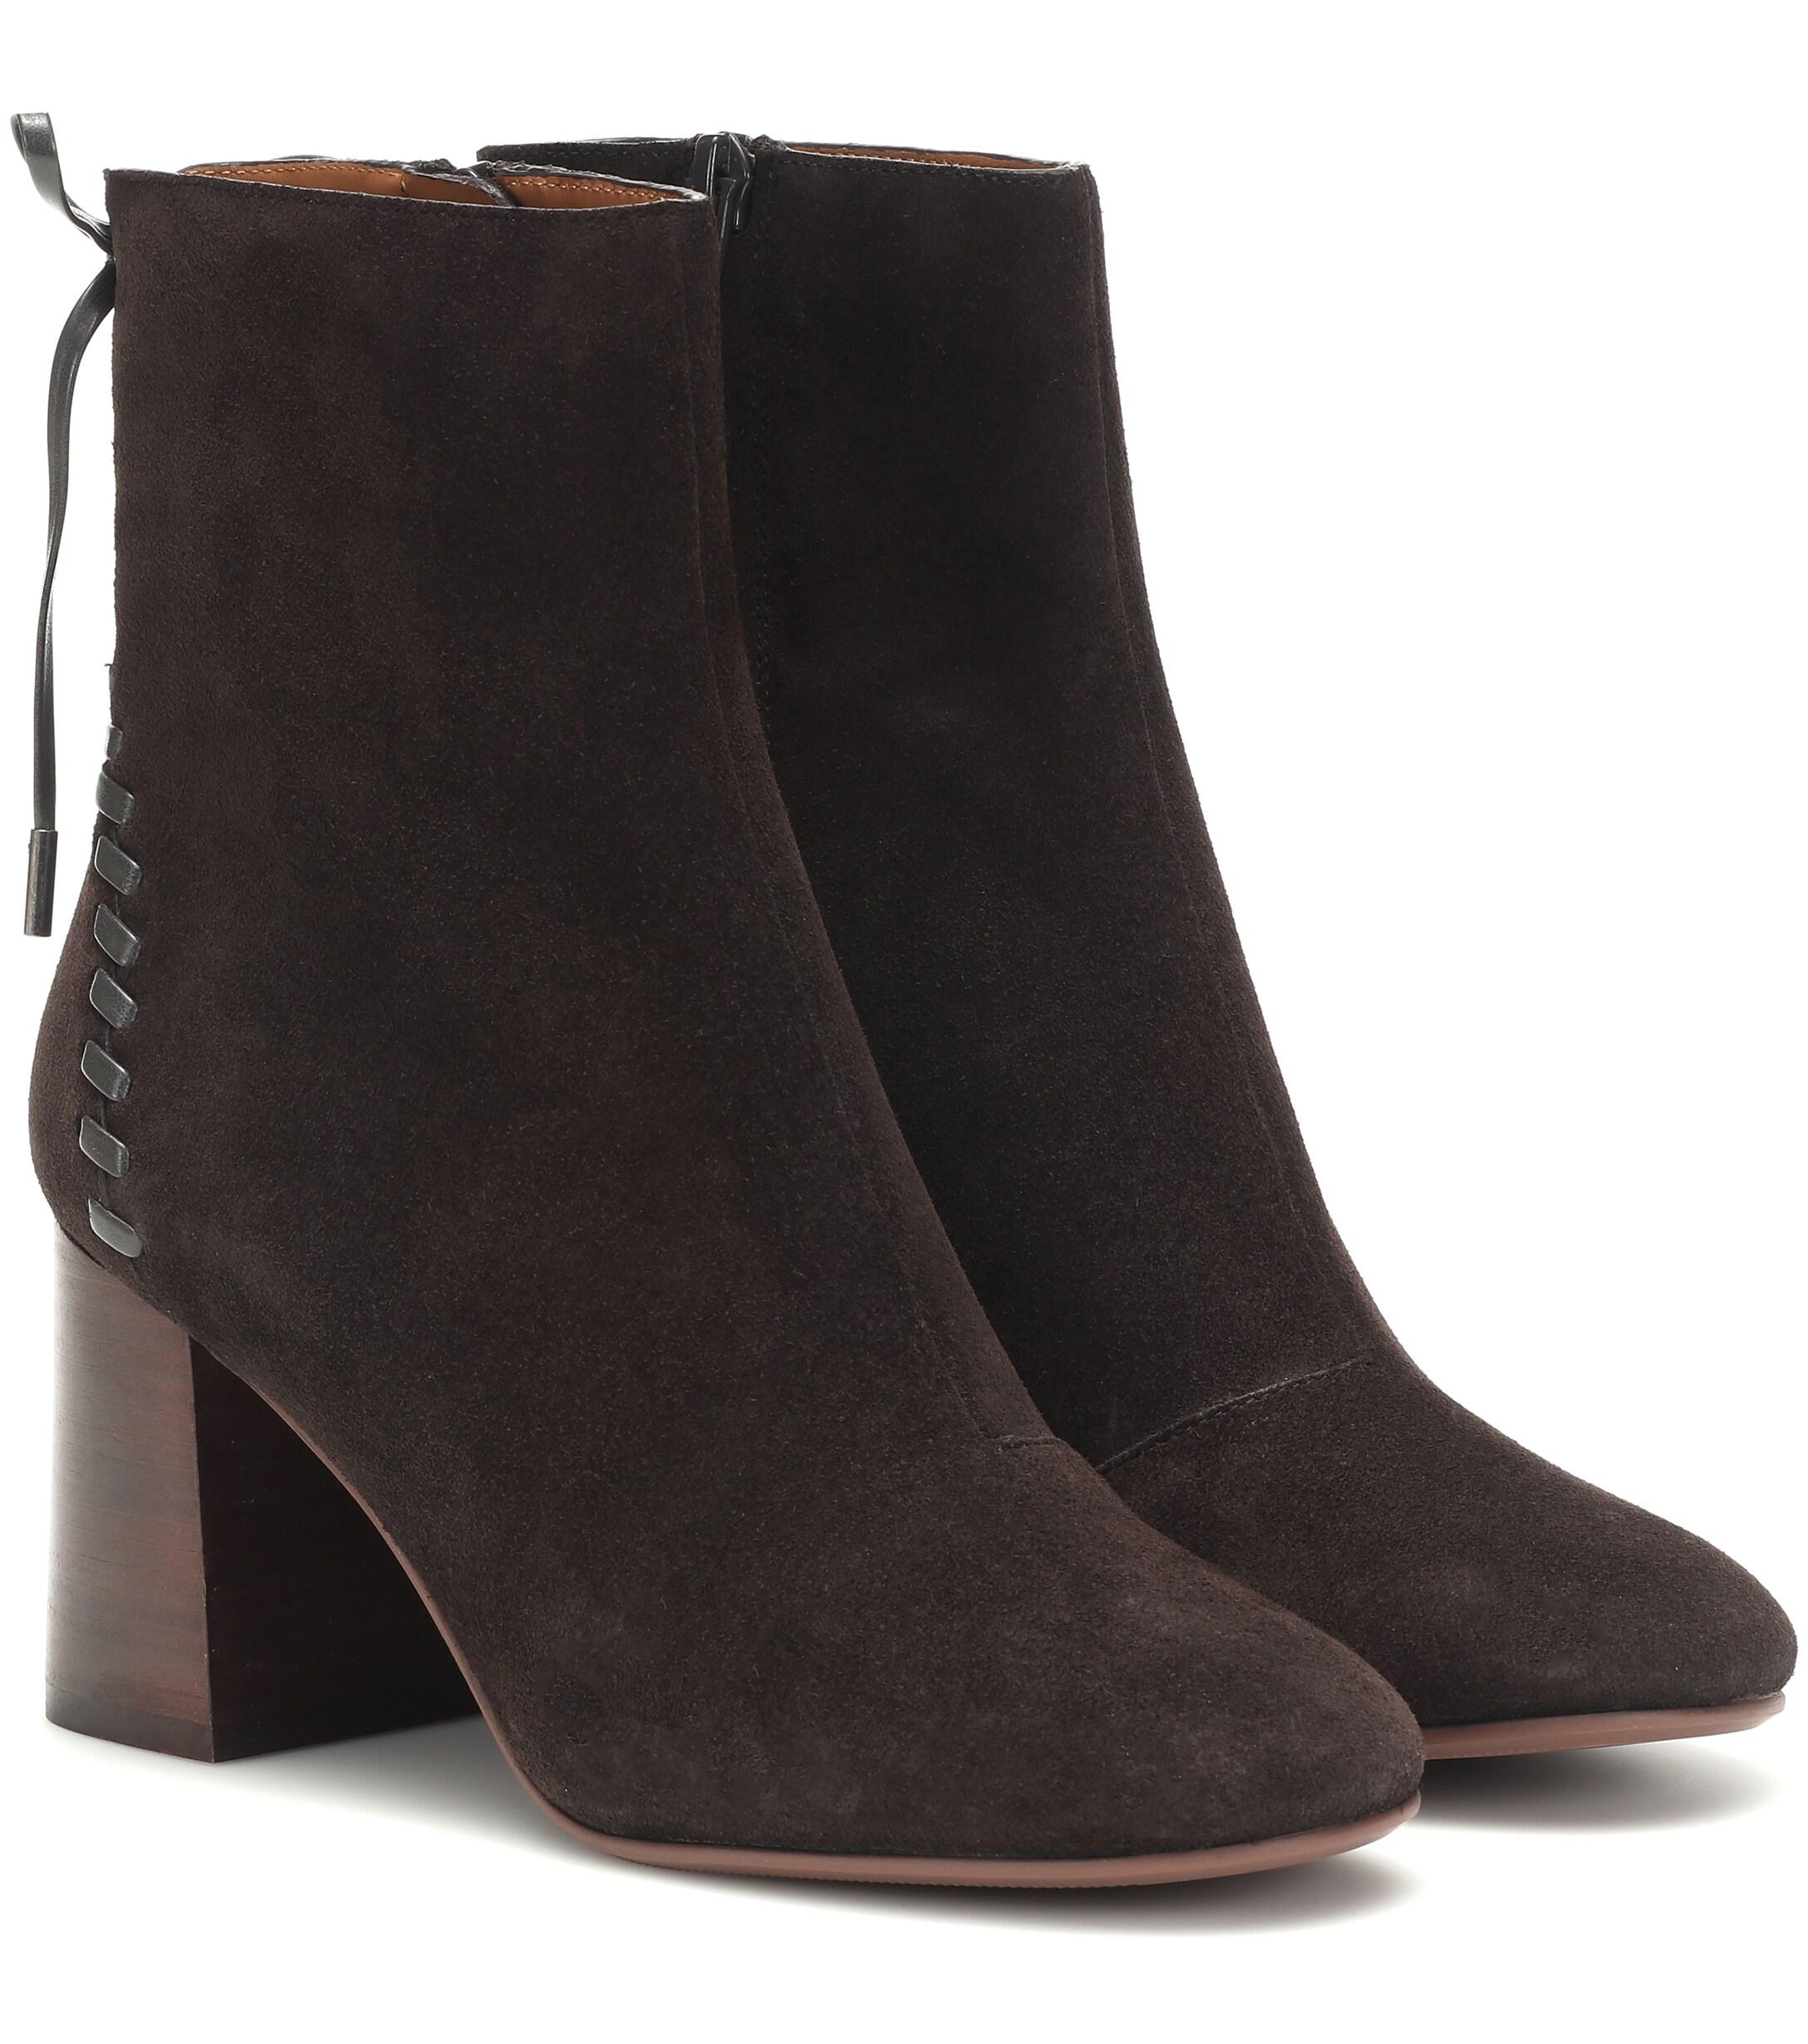 See By Chloé Reese Suede Ankle Boots in Black - Lyst